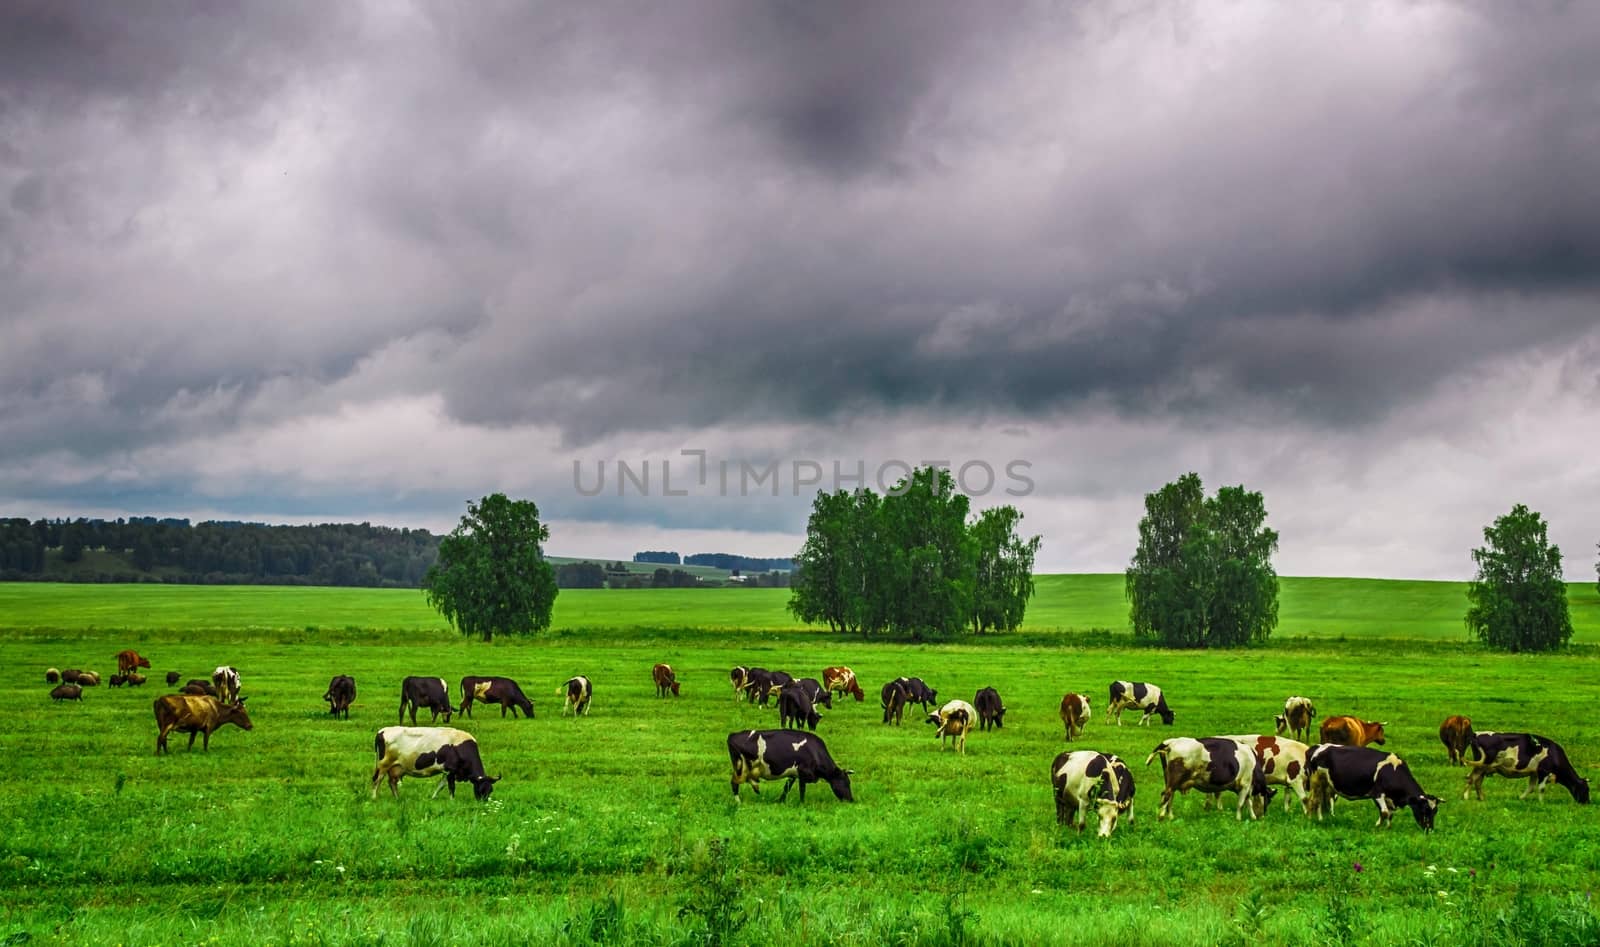 cows grazing in a field the evening before the storm